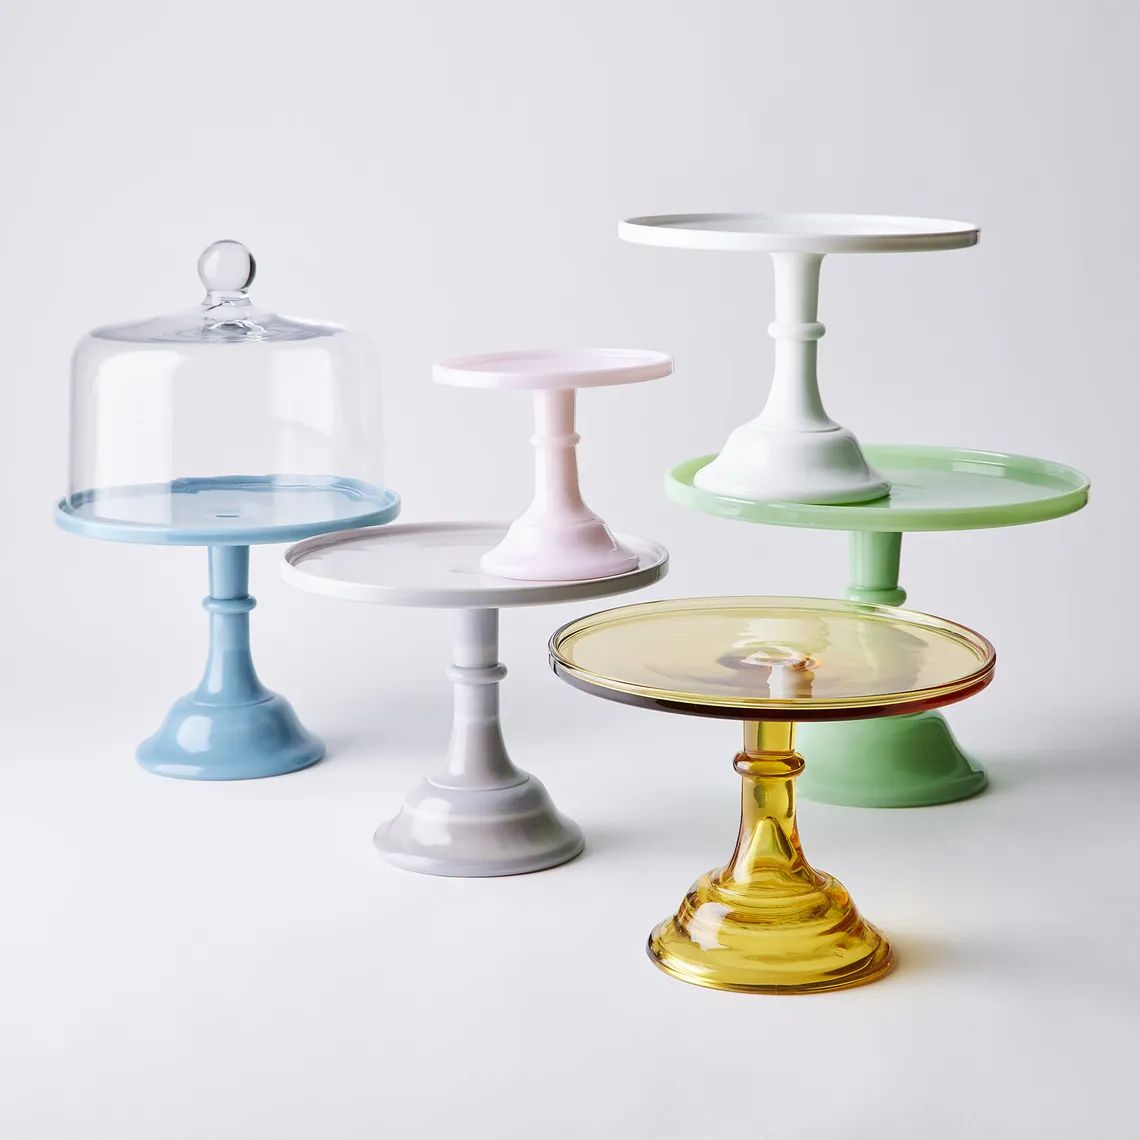 Mosser Colored Glass Cake Stand | Food52